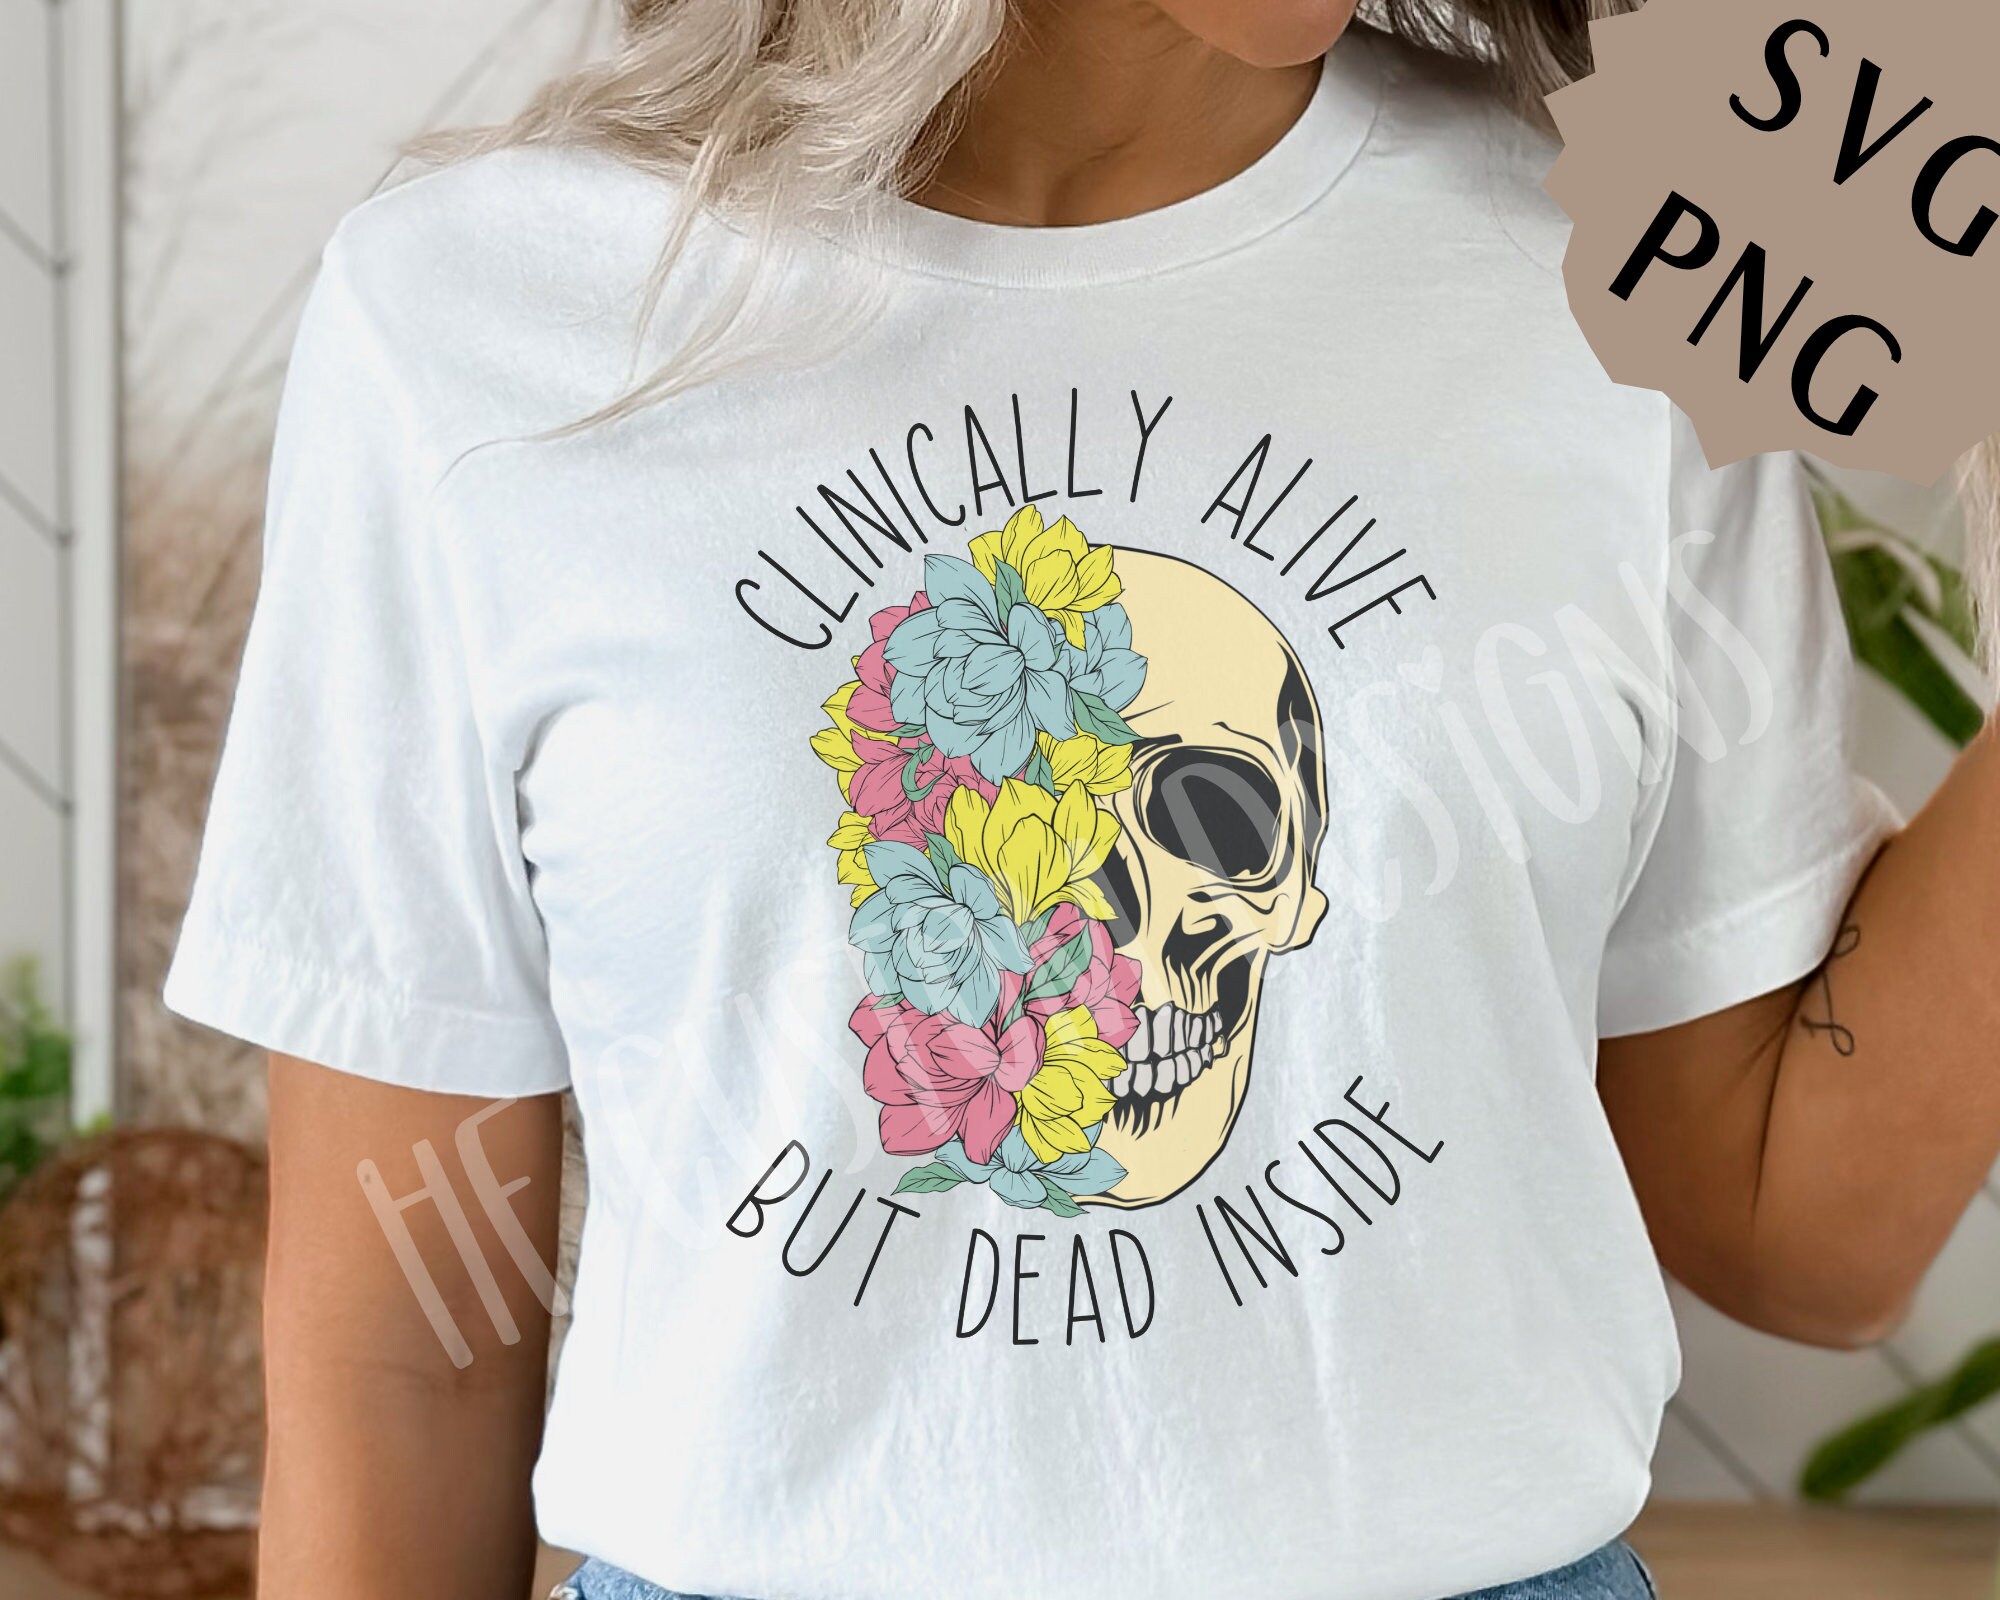 Clinically alive but dead inside png, Dead inside png